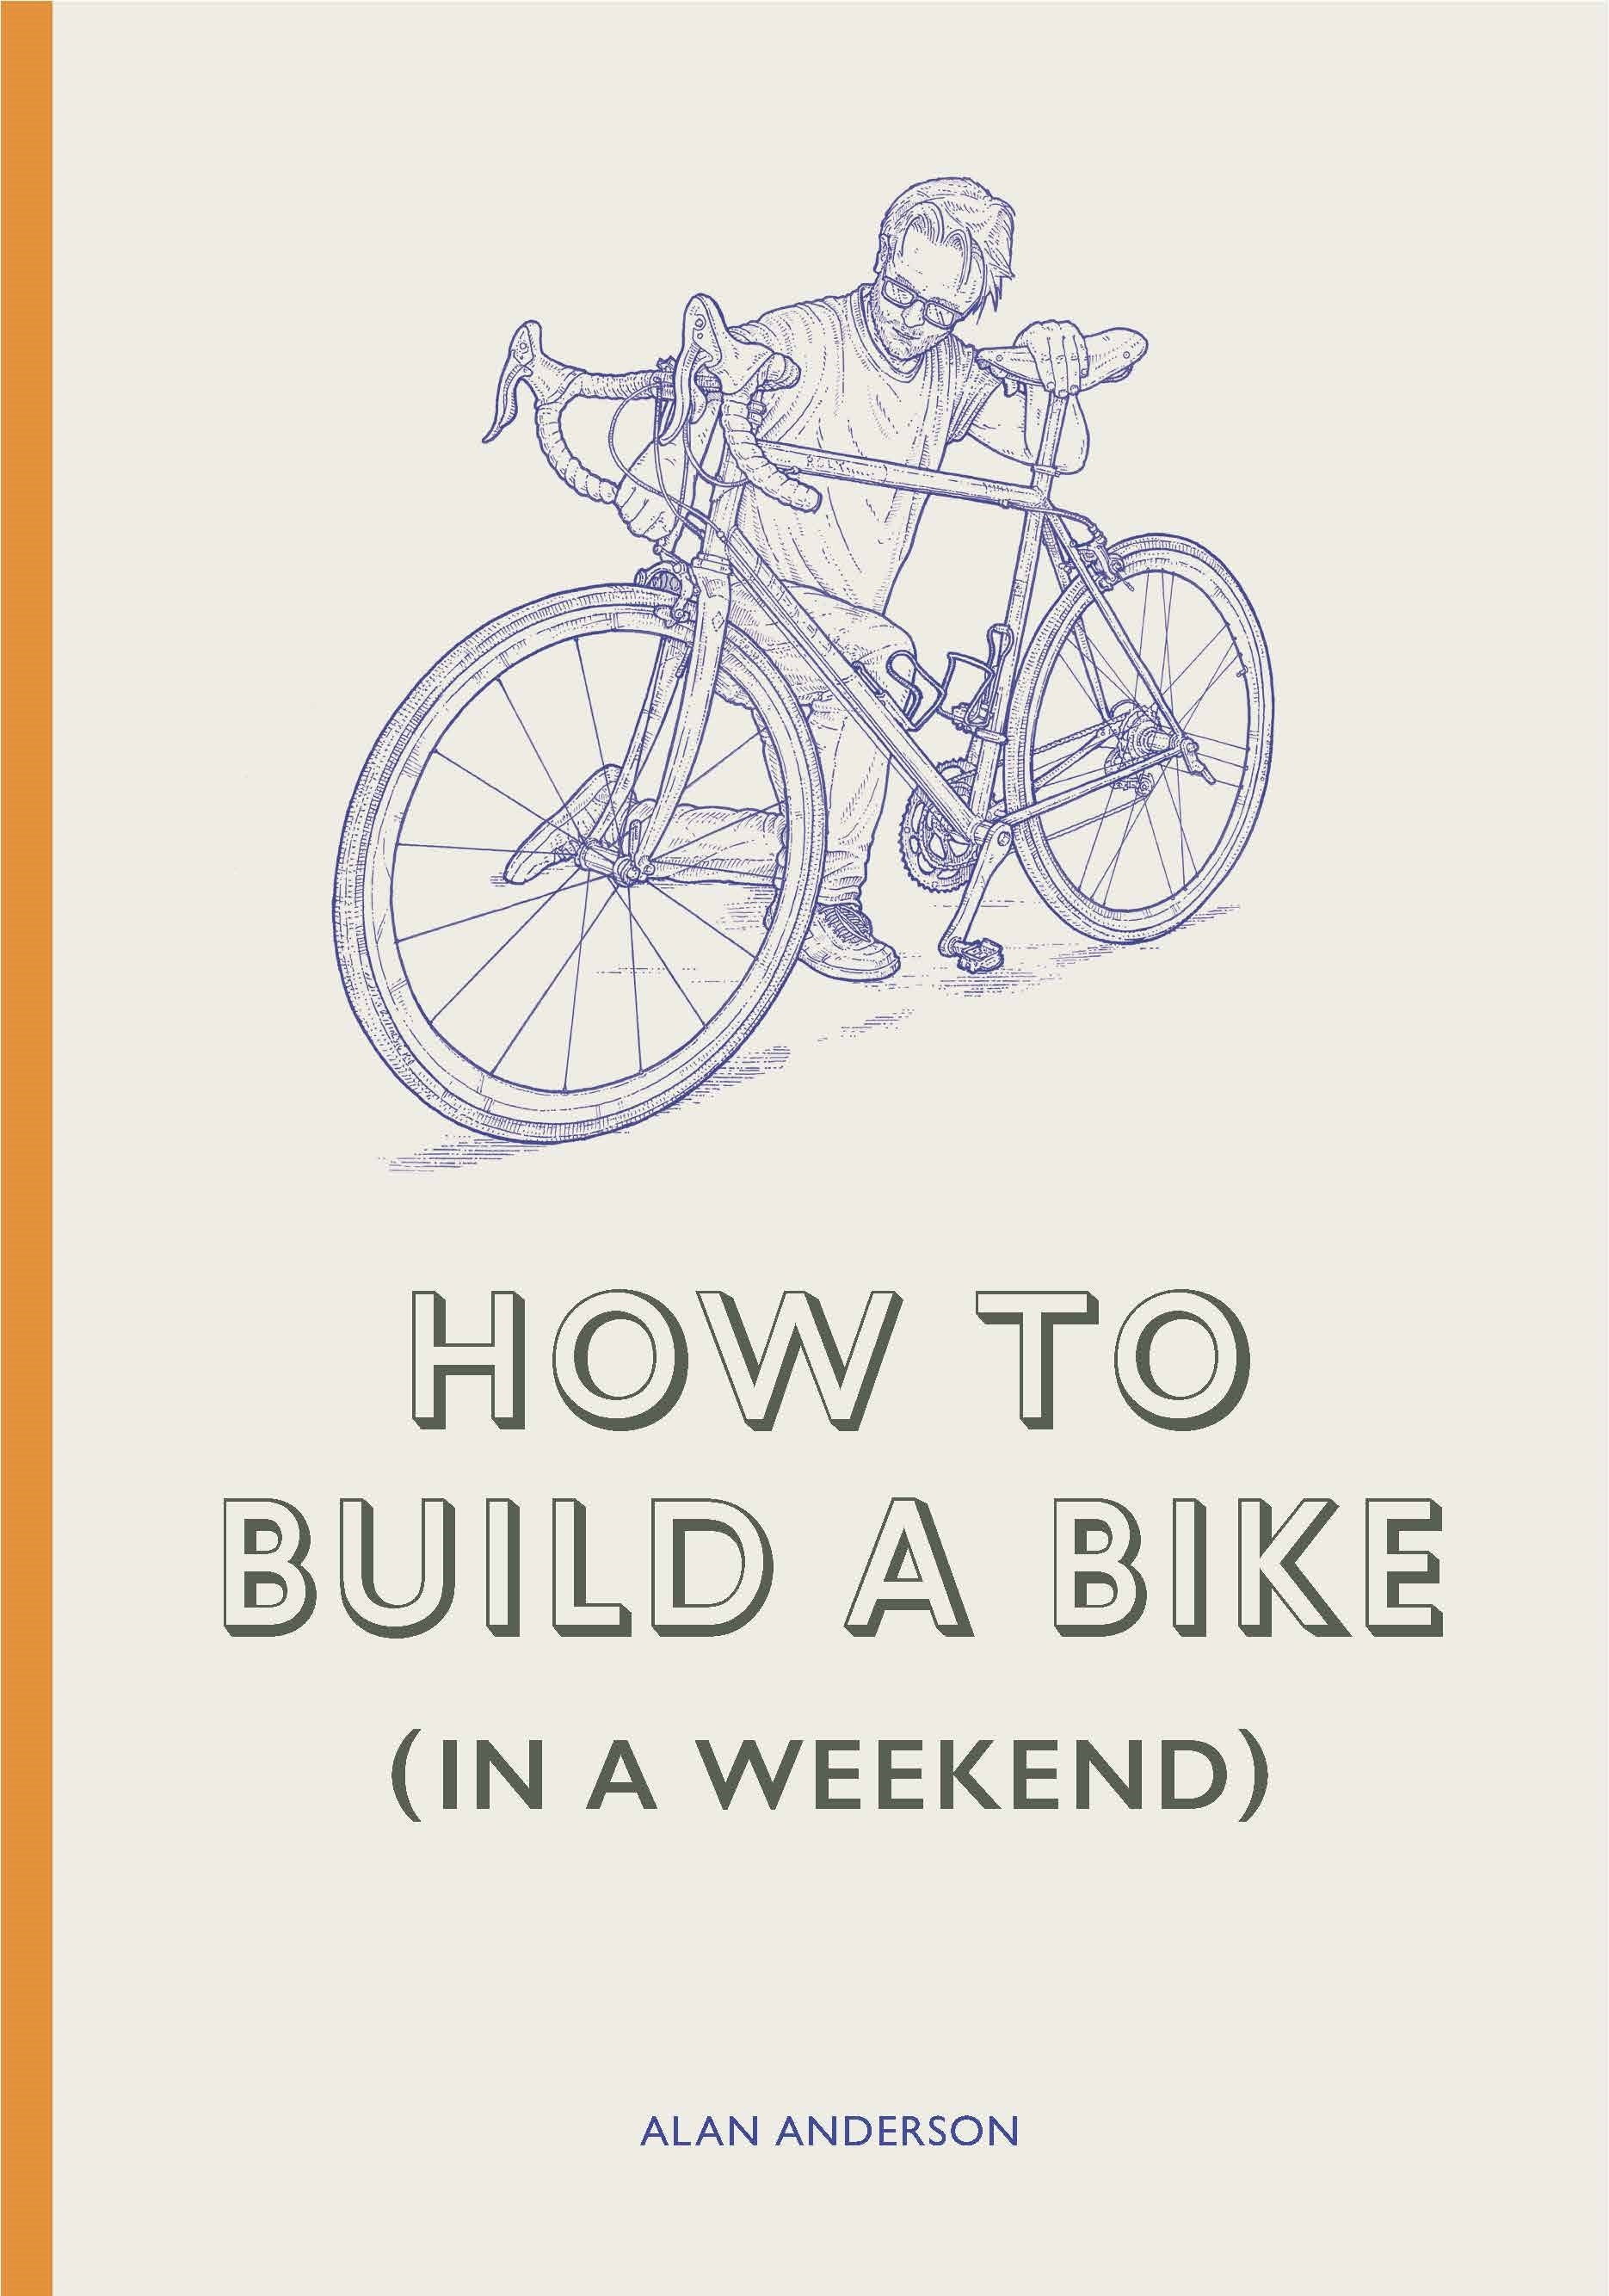 How to Build a Bike (in a Weekend) by Lee John Phillips, Alan Anderson